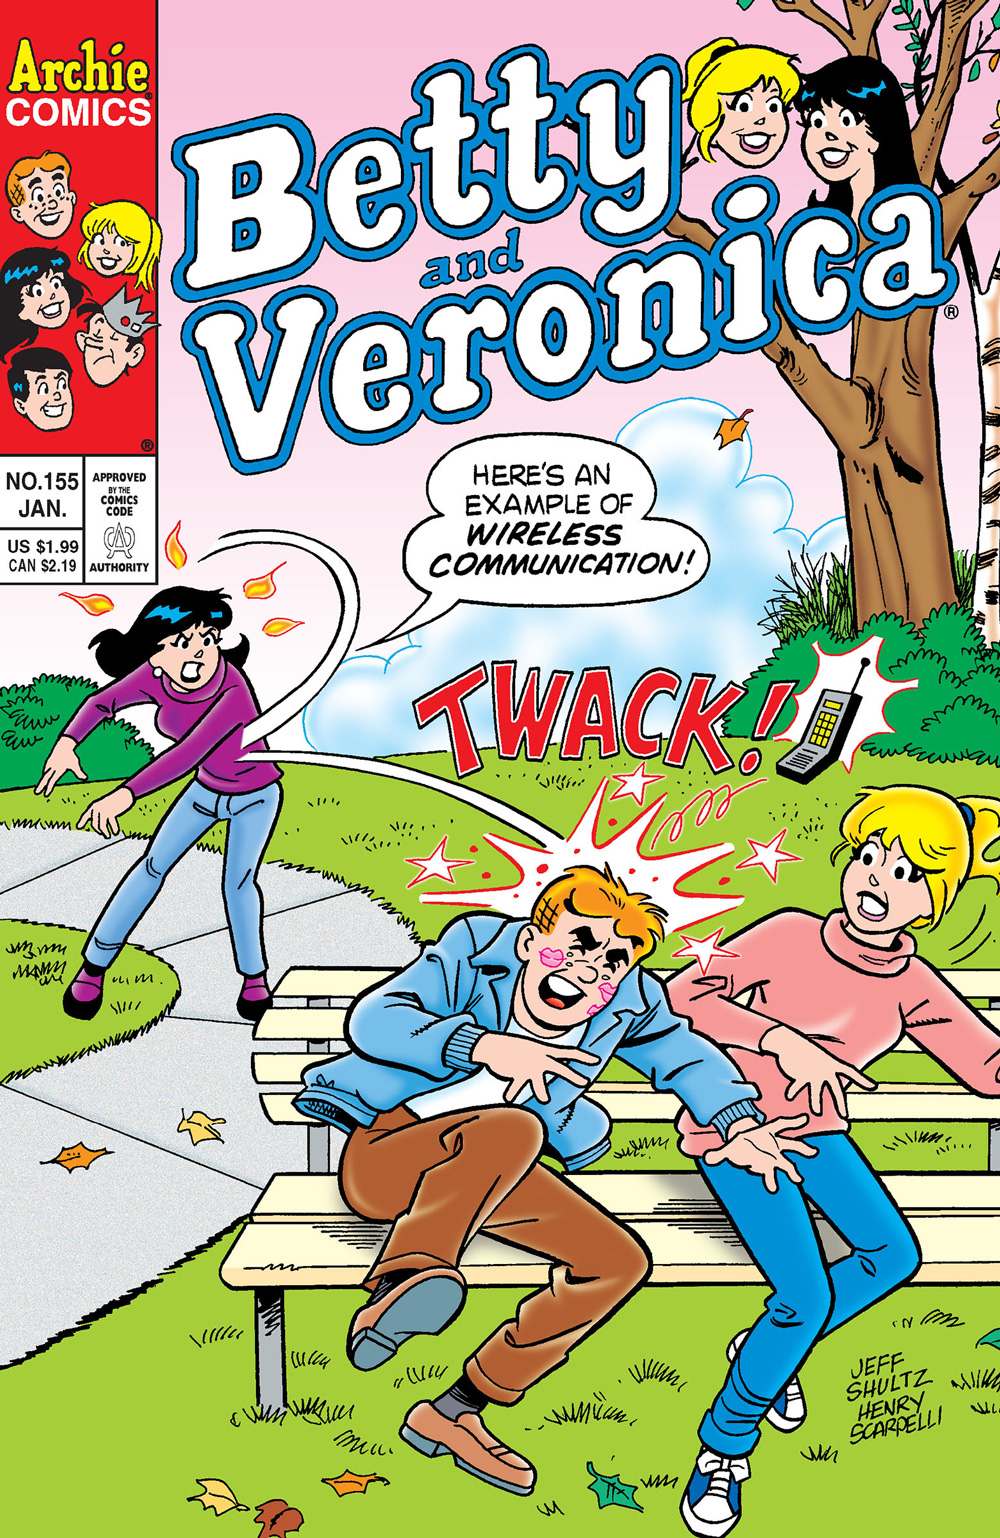 Betty sits with Archie on a park bench. Veronica, angry in the background, throws a cell phone at his head, saying it's an example of wireless communication.